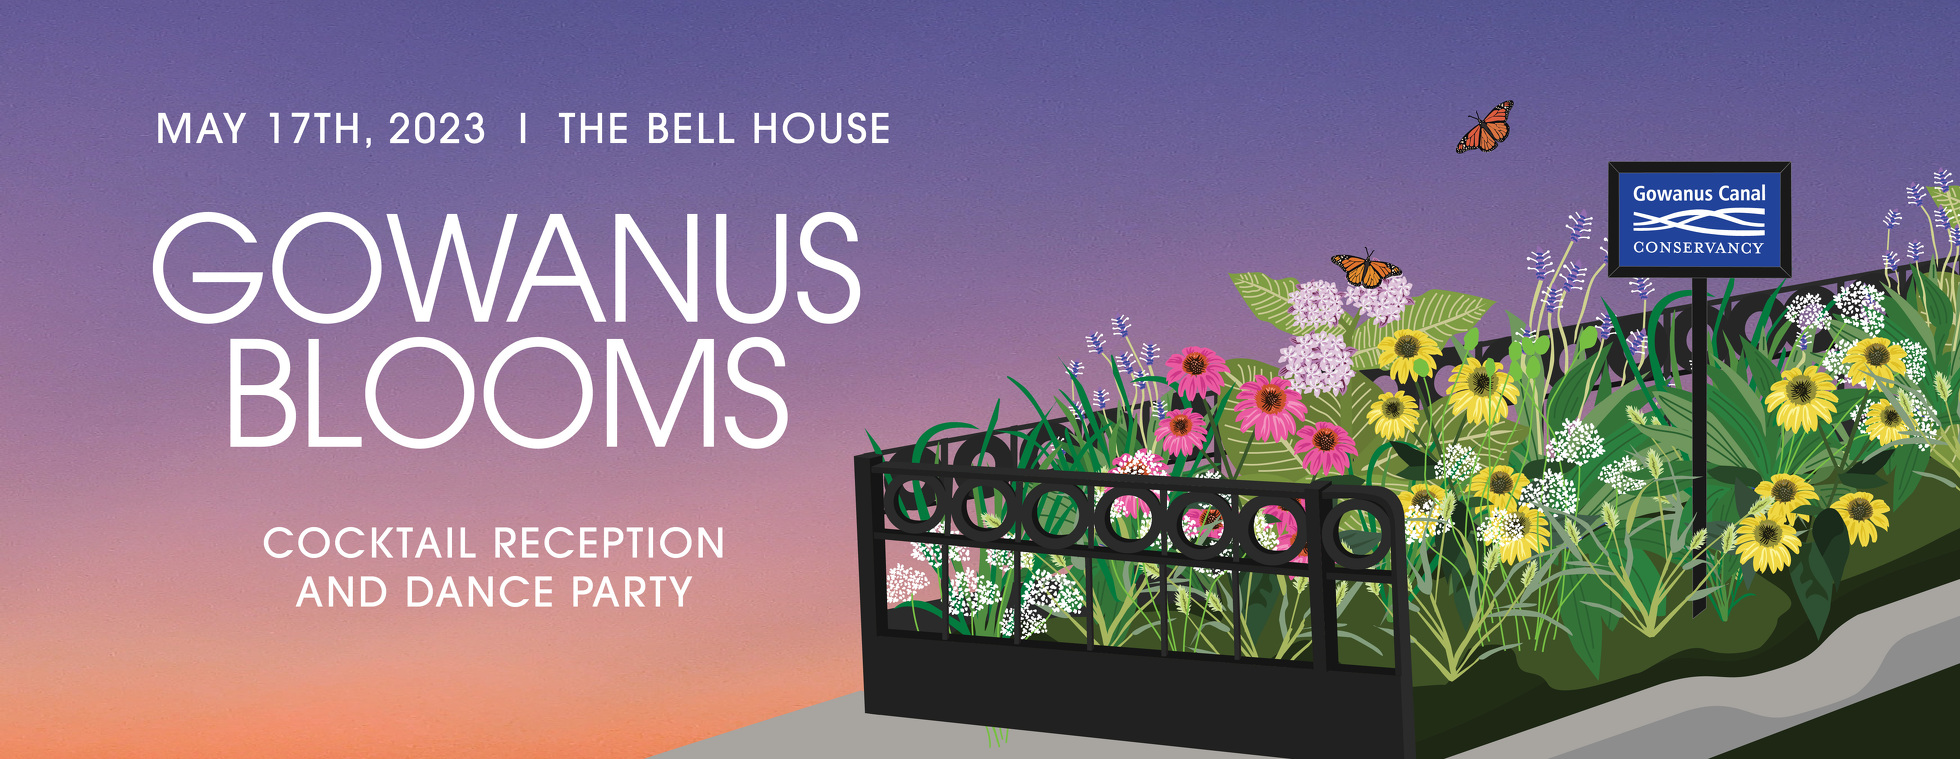 Gowanus Blooms, a Cocktail Reception and Dance Party